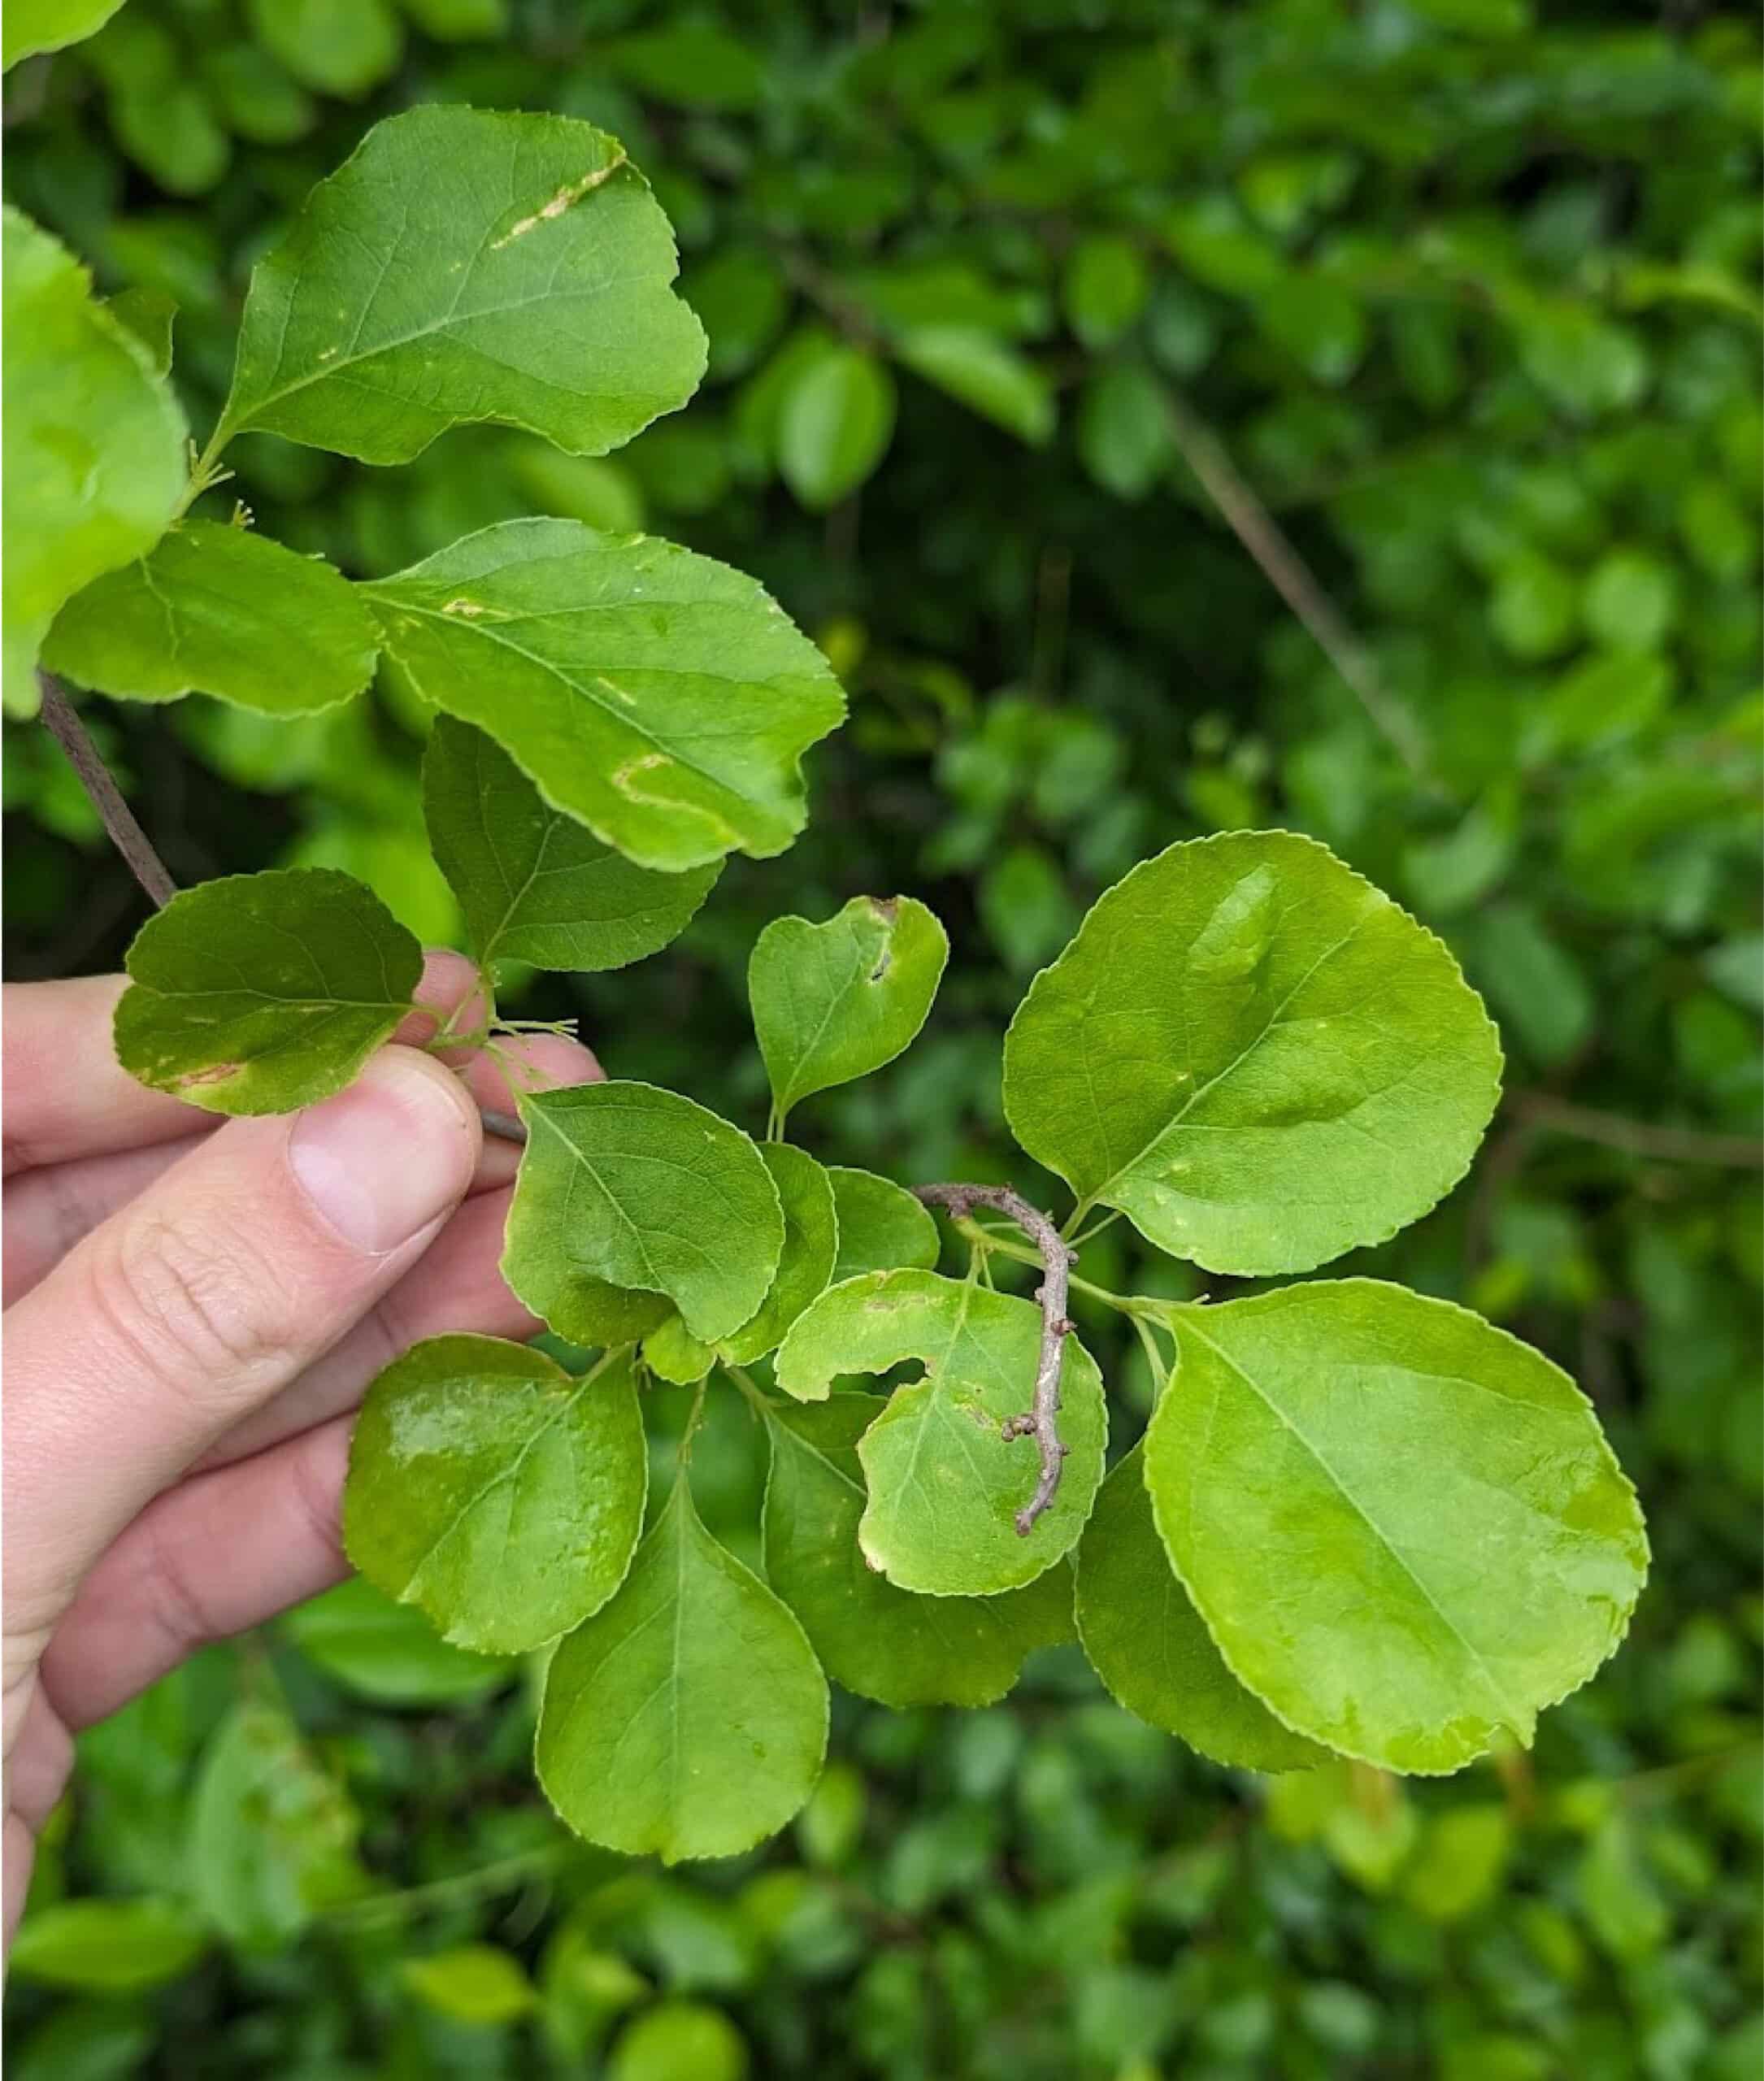 A hand holding a young bittersweet plant with its oval leaves in the foreground